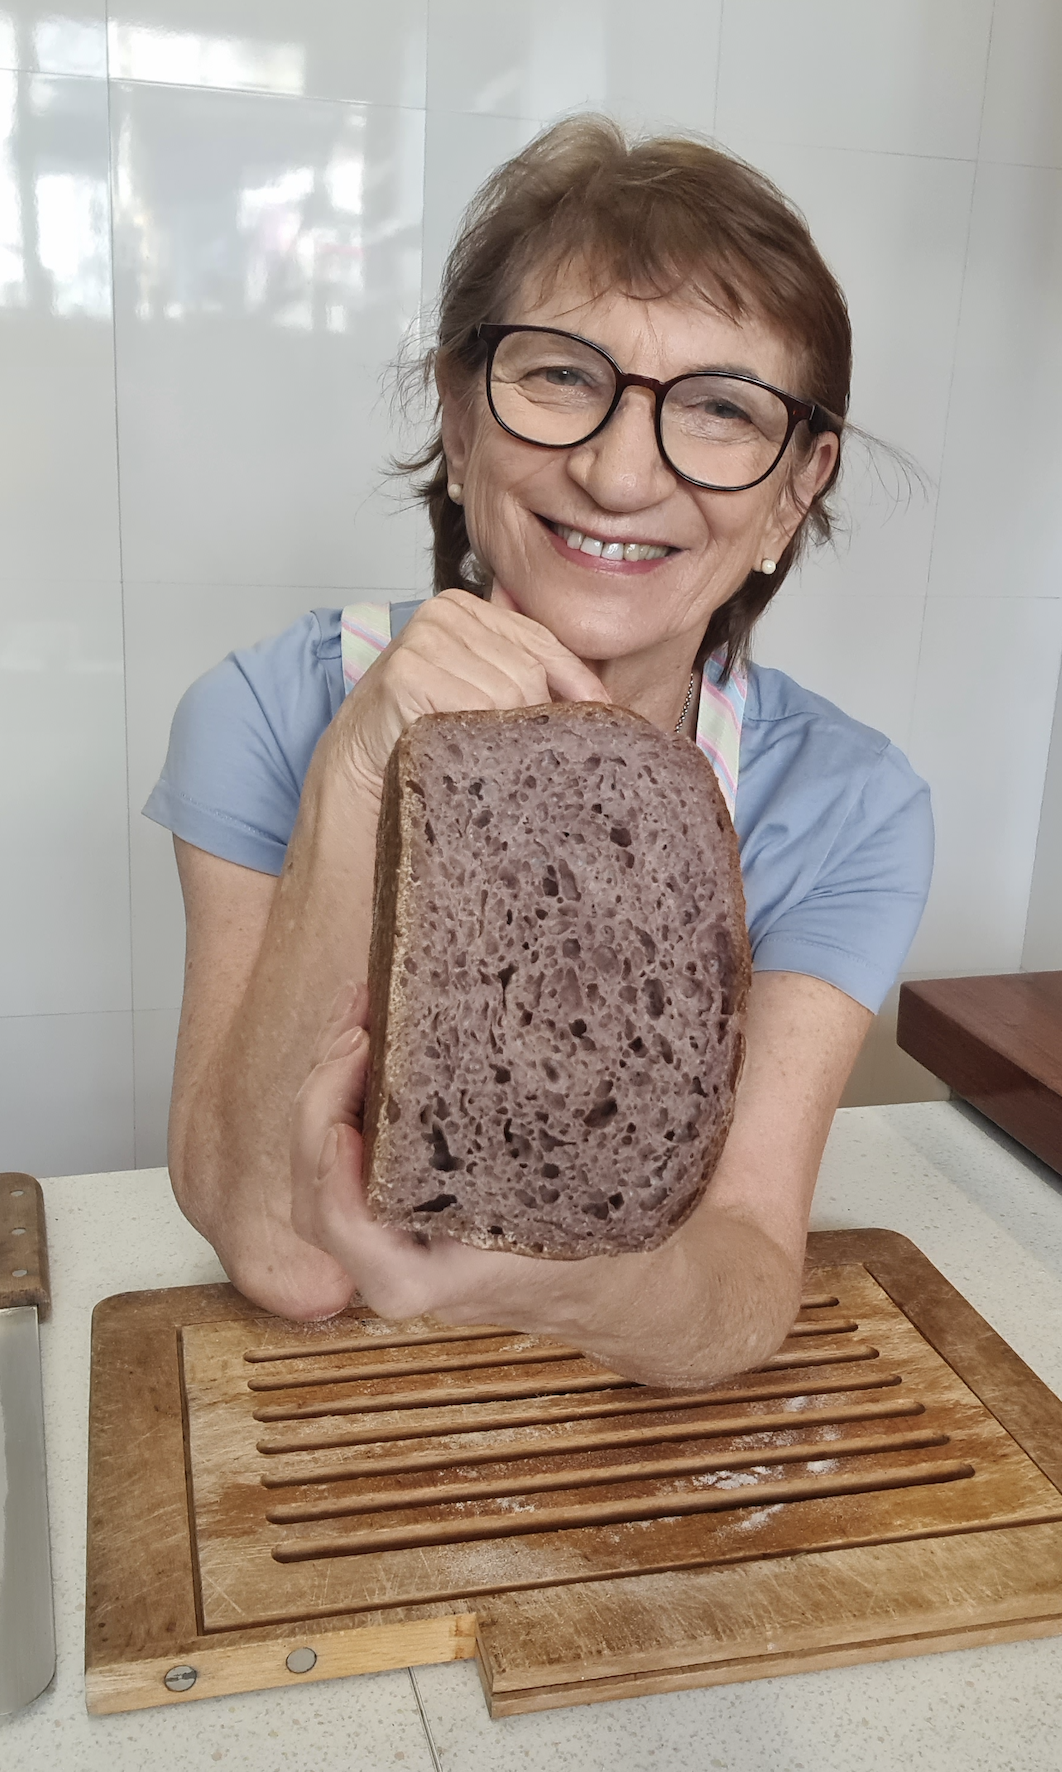 interview with Mariana Koppmann biochemist author sourdough bread scientist based in buenos aires argentina south america follow her on instagram 9